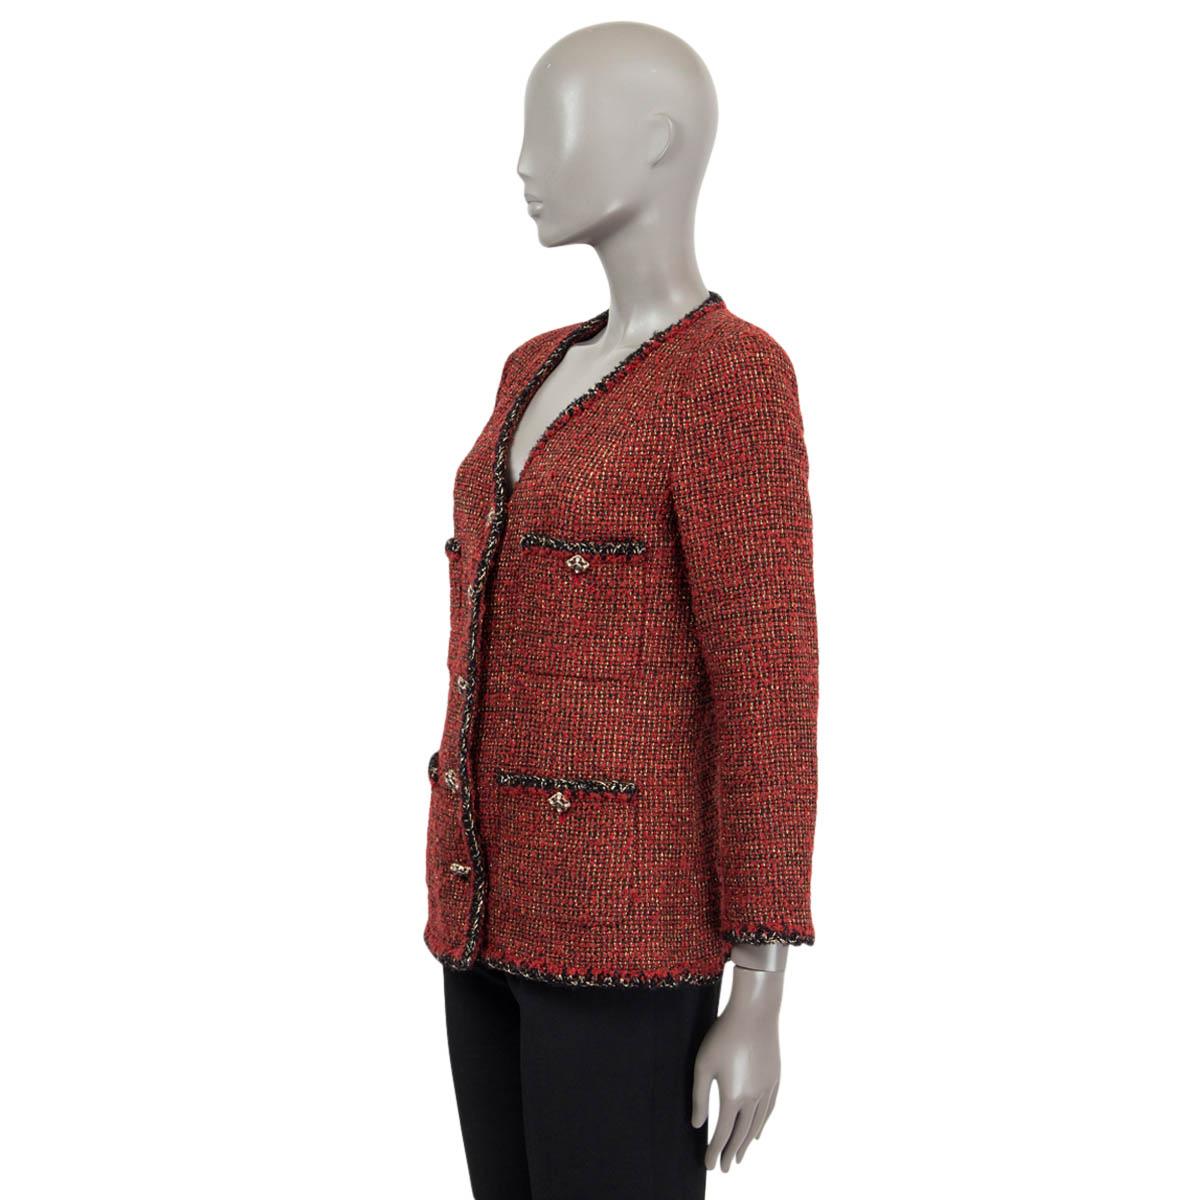 whose creation is the iconic boxy suit in tweed with braid trims